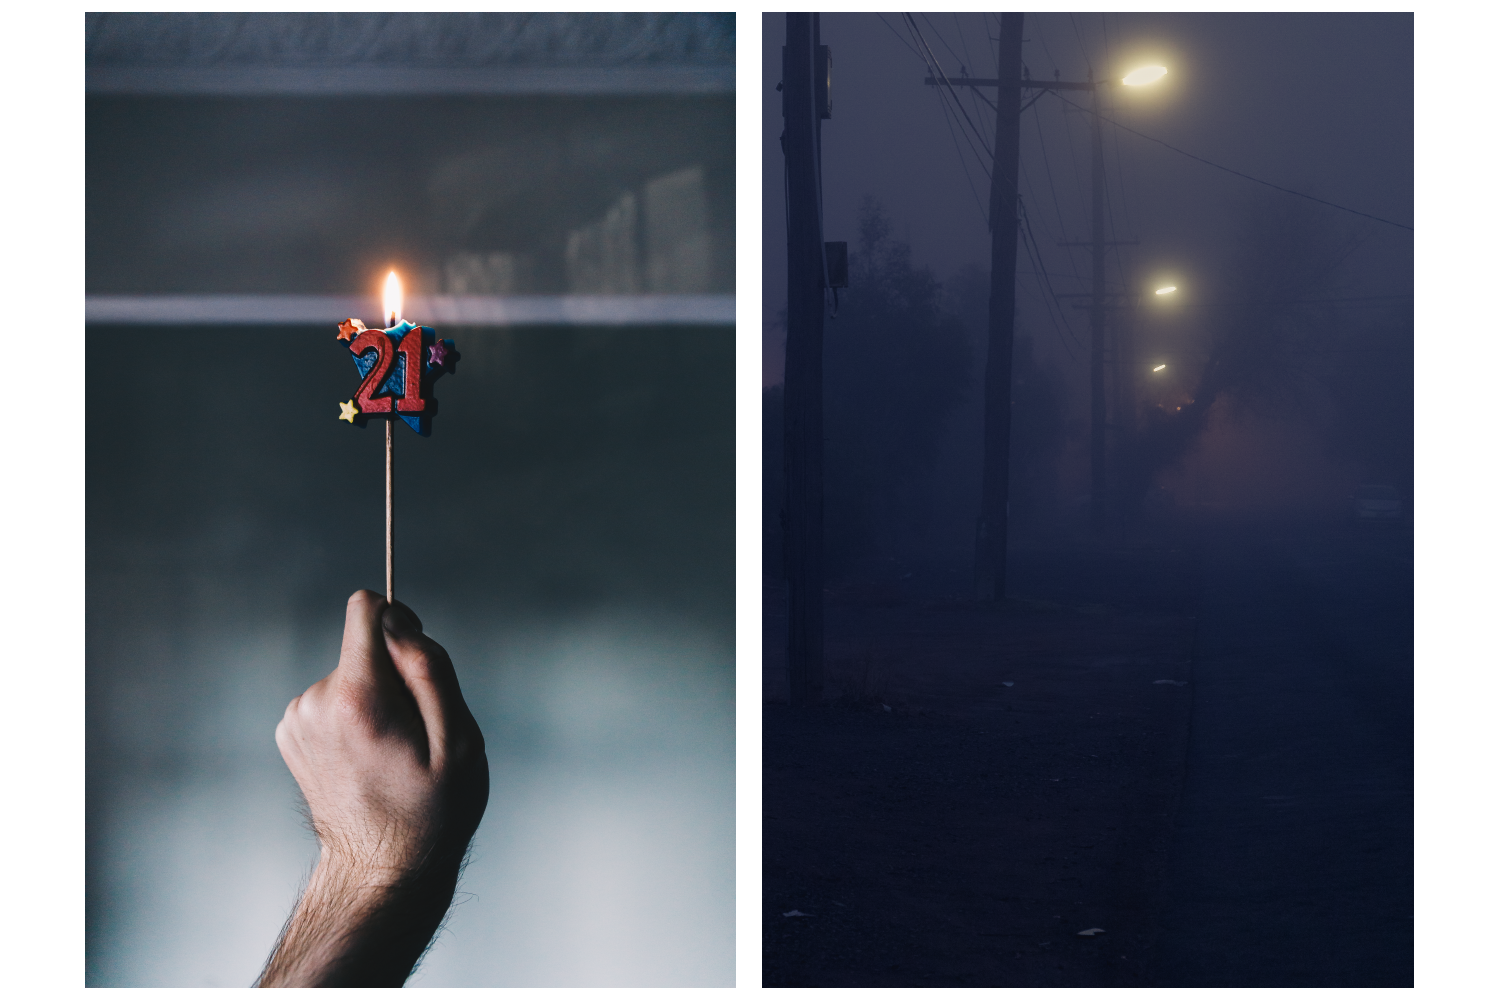 Colour photograph diptych depicting a hand holding a lit 21st Birthday candle and a foggy night street scene.